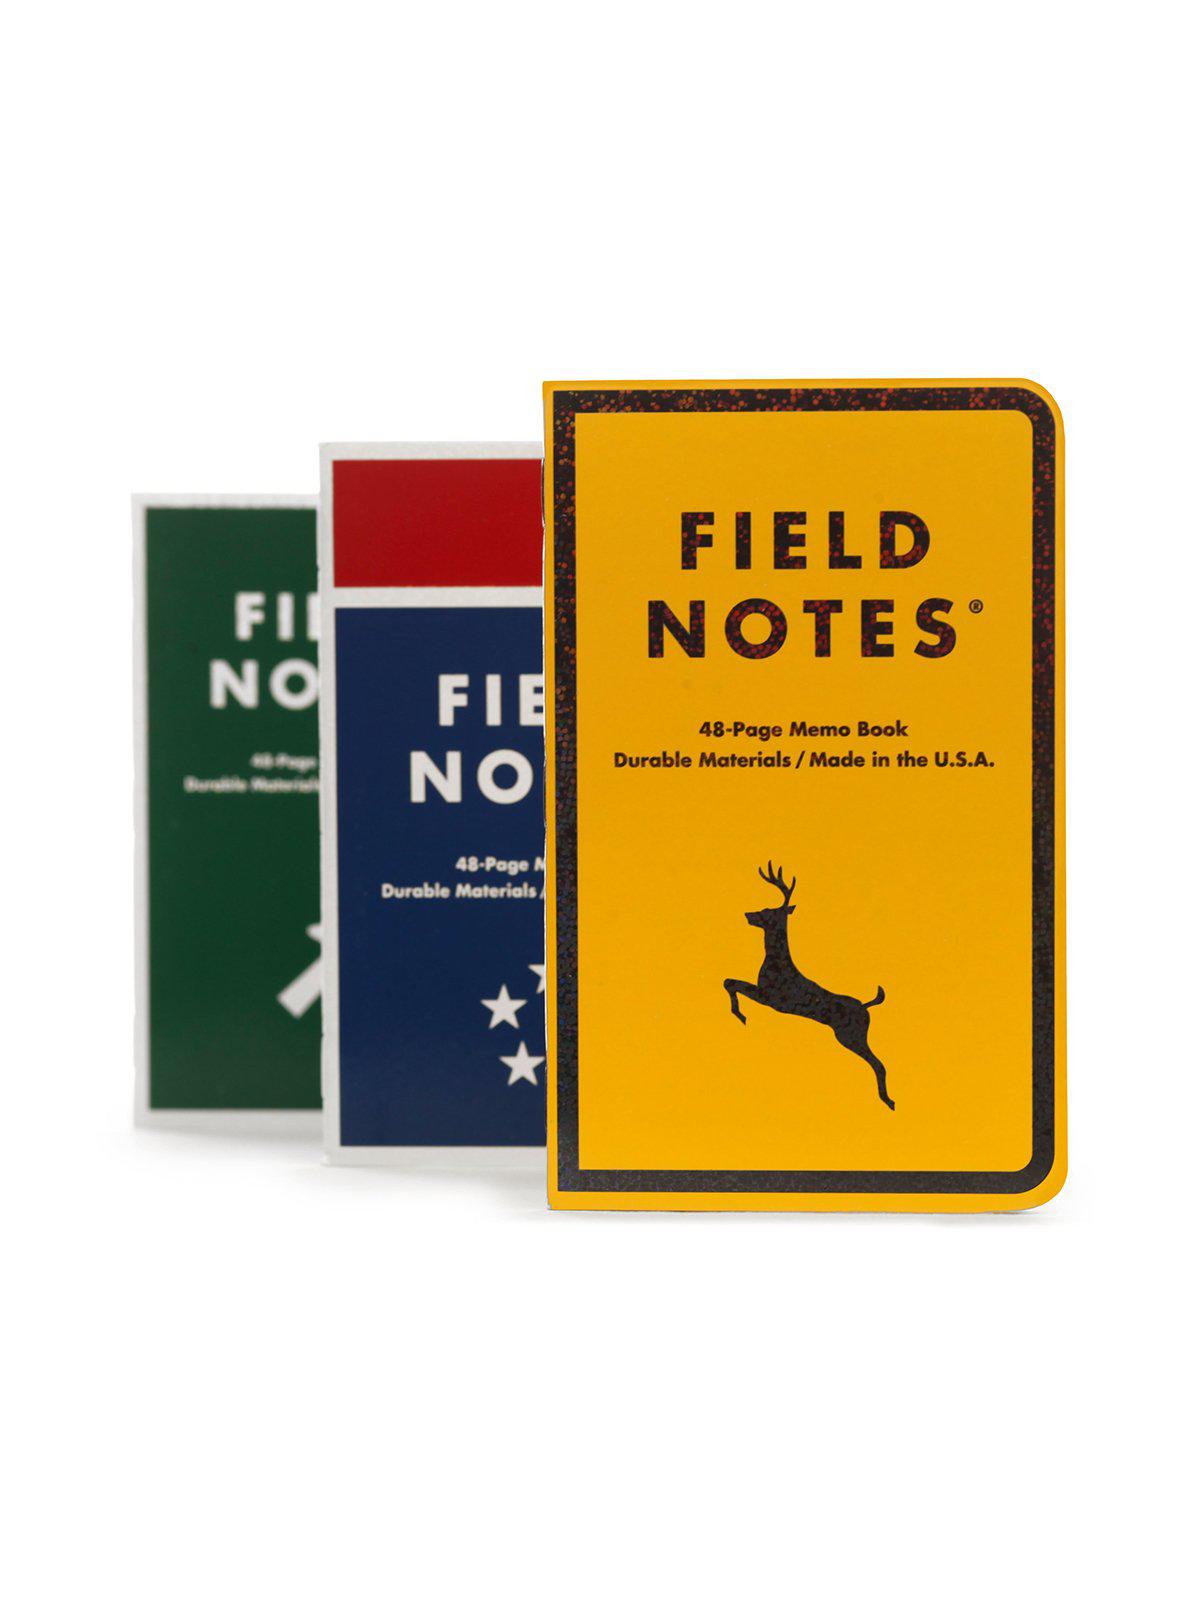 Field Notes Mile Marker 3 Pack Dot Graph Paper - MORE by Morello Indonesia